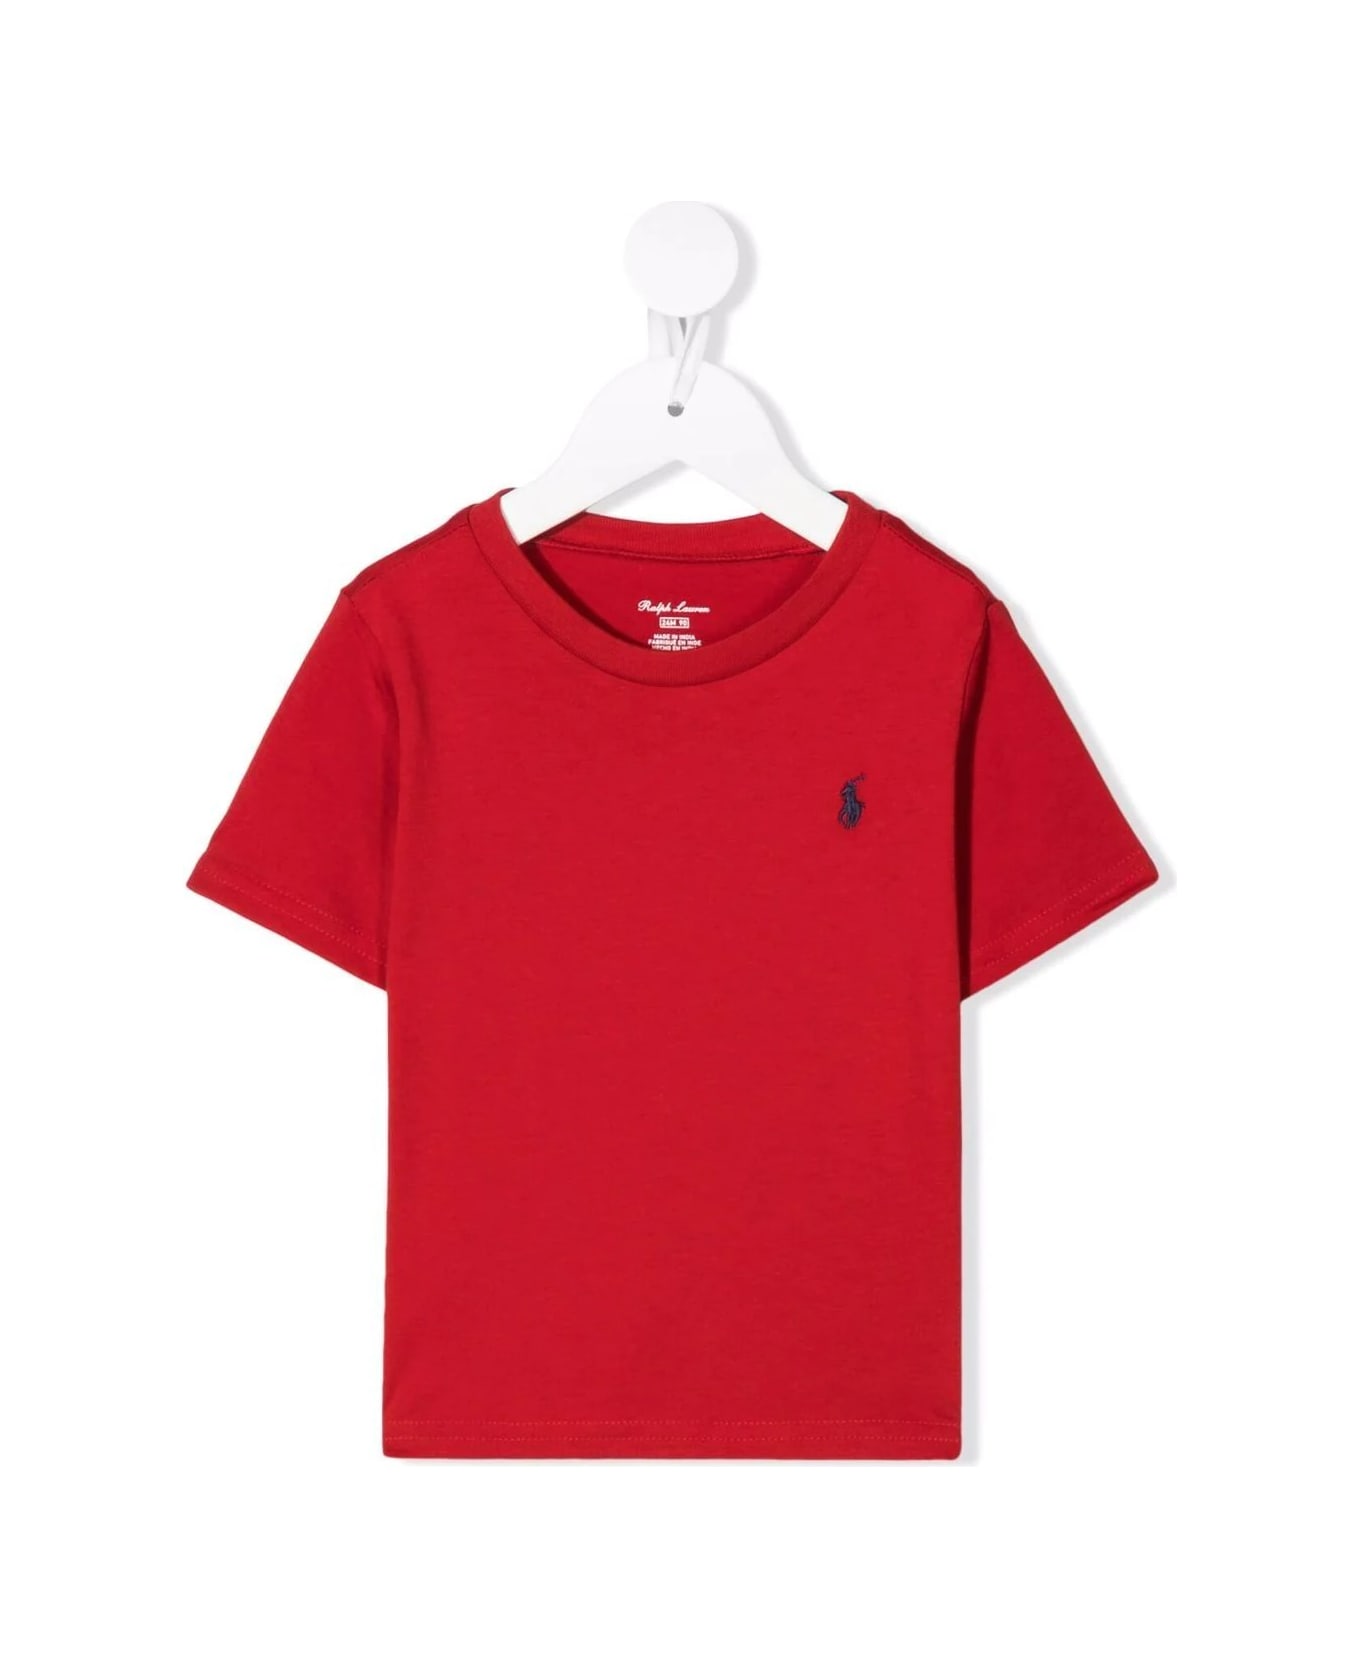 Ralph Lauren Red T-shirt With Navy Blue Pony - Red